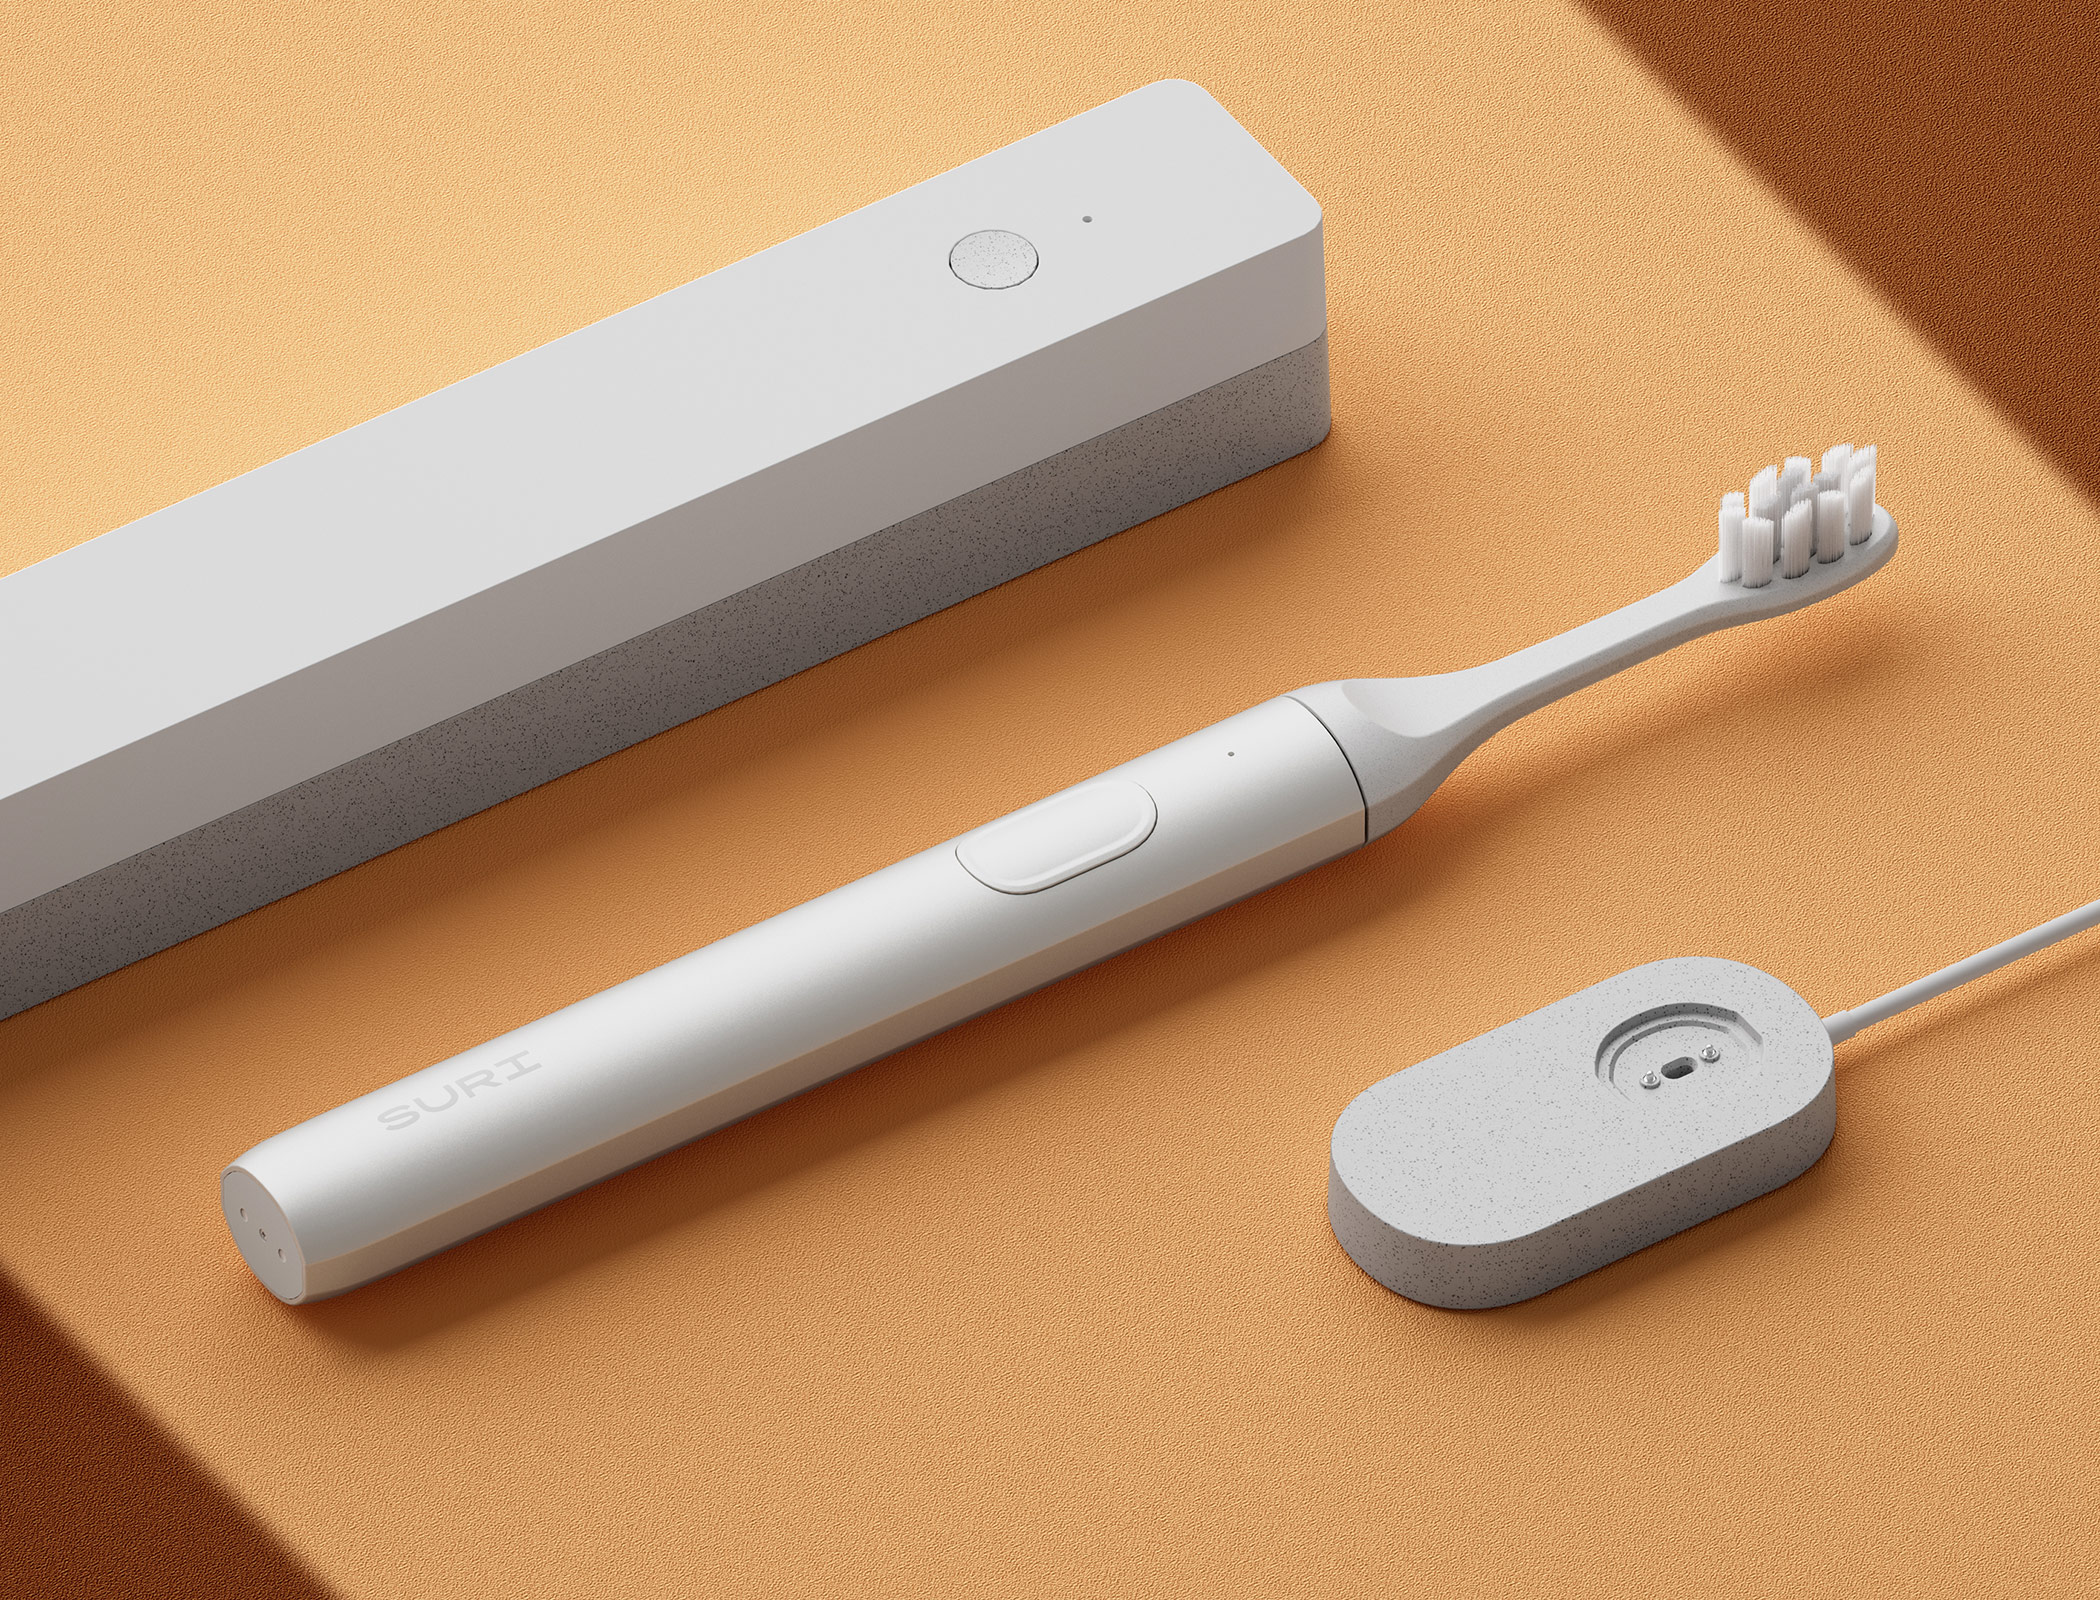 Hands-on review: Suri sustainable electric toothbrush